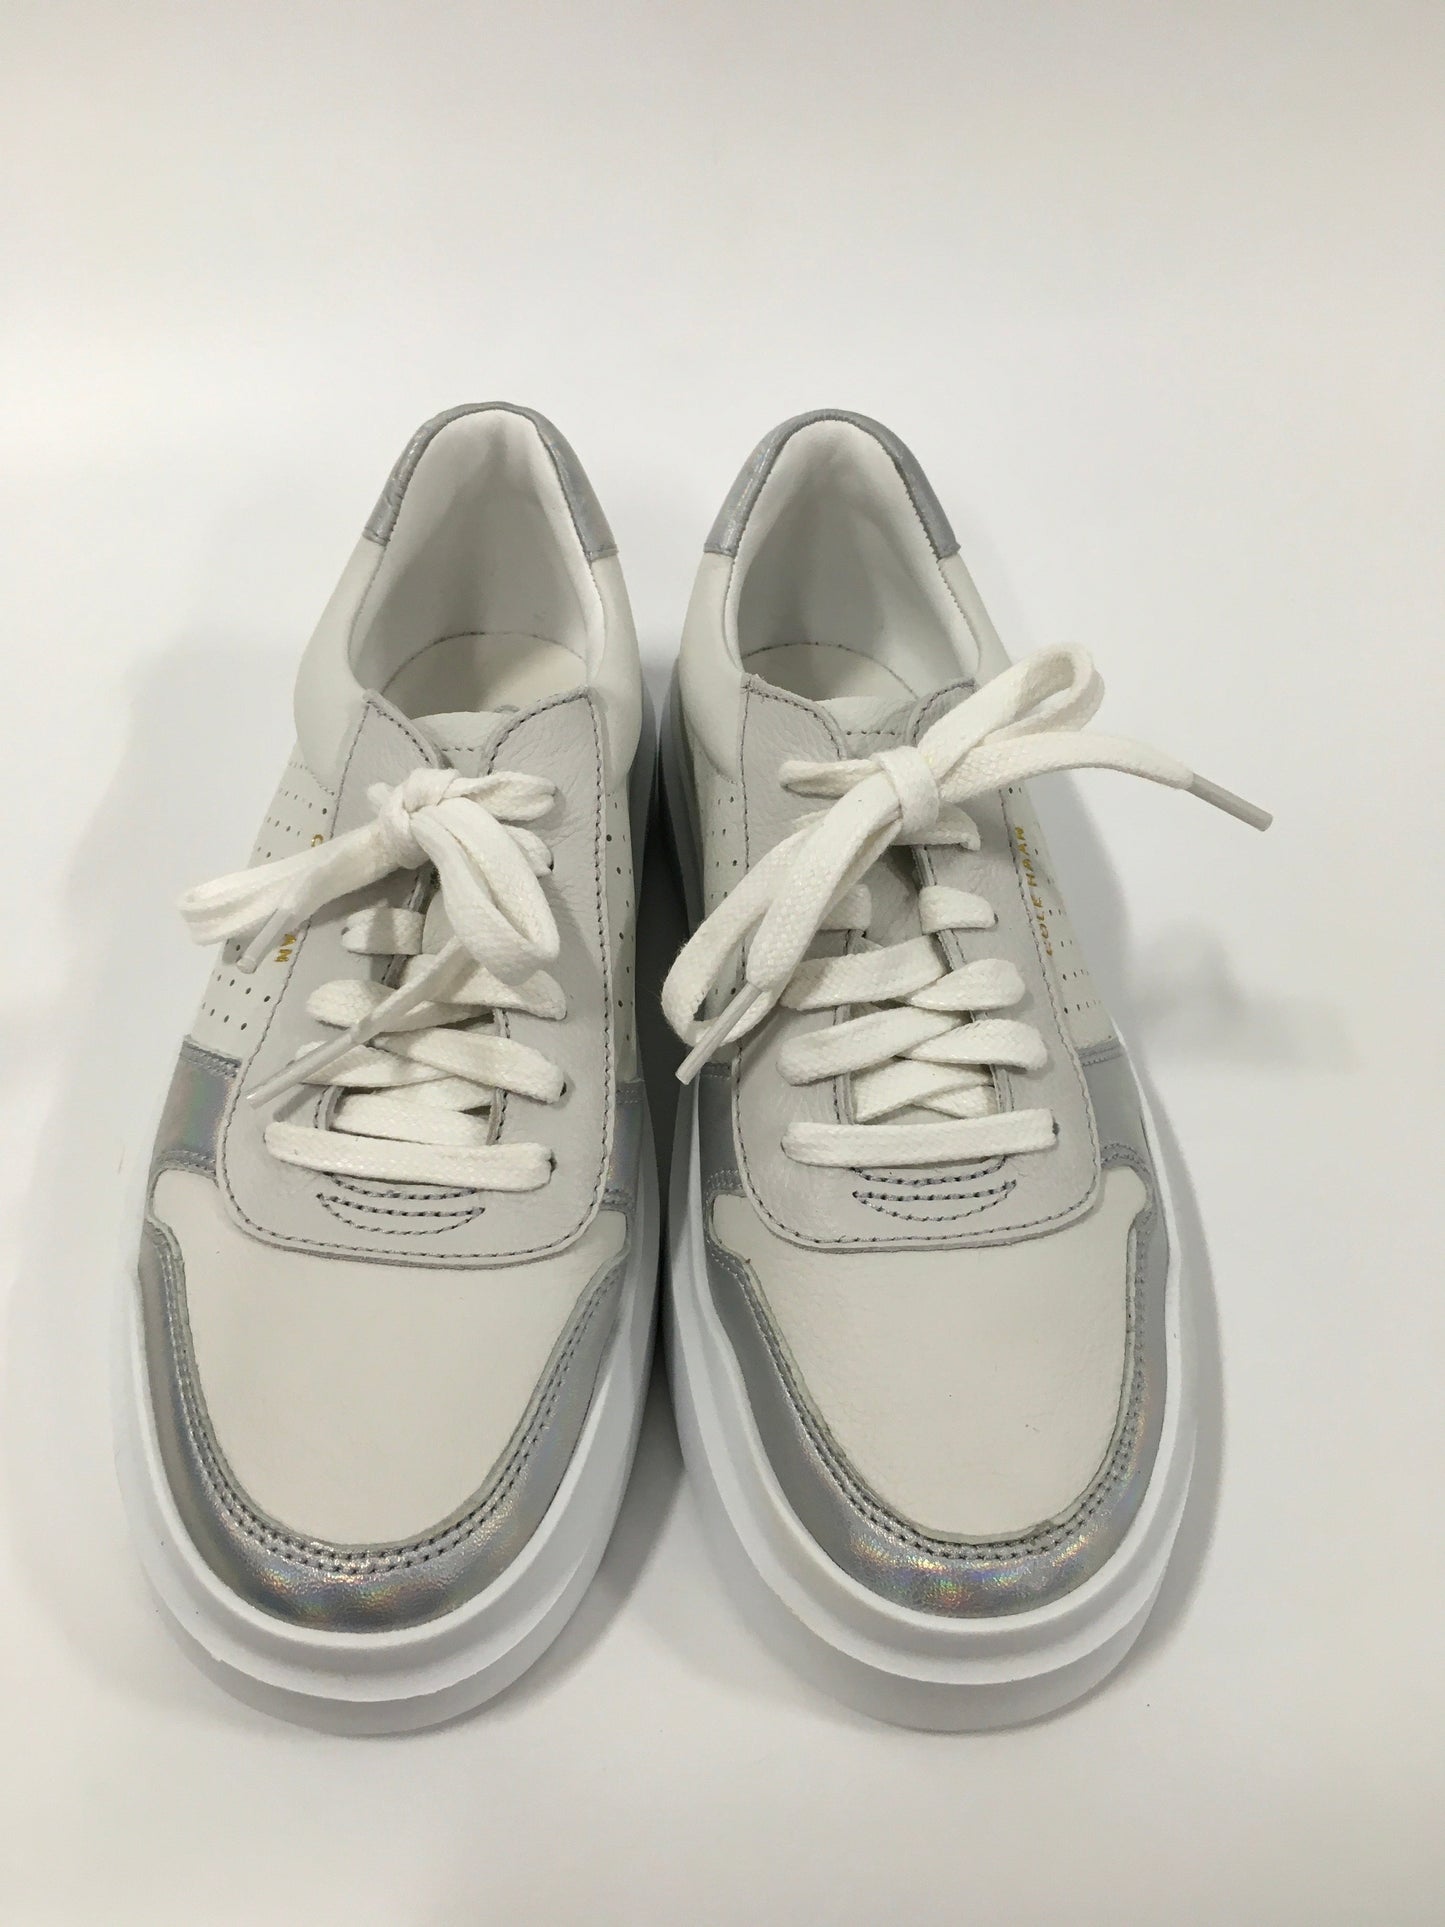 White Shoes Sneakers Cole-haan, Size 7.5